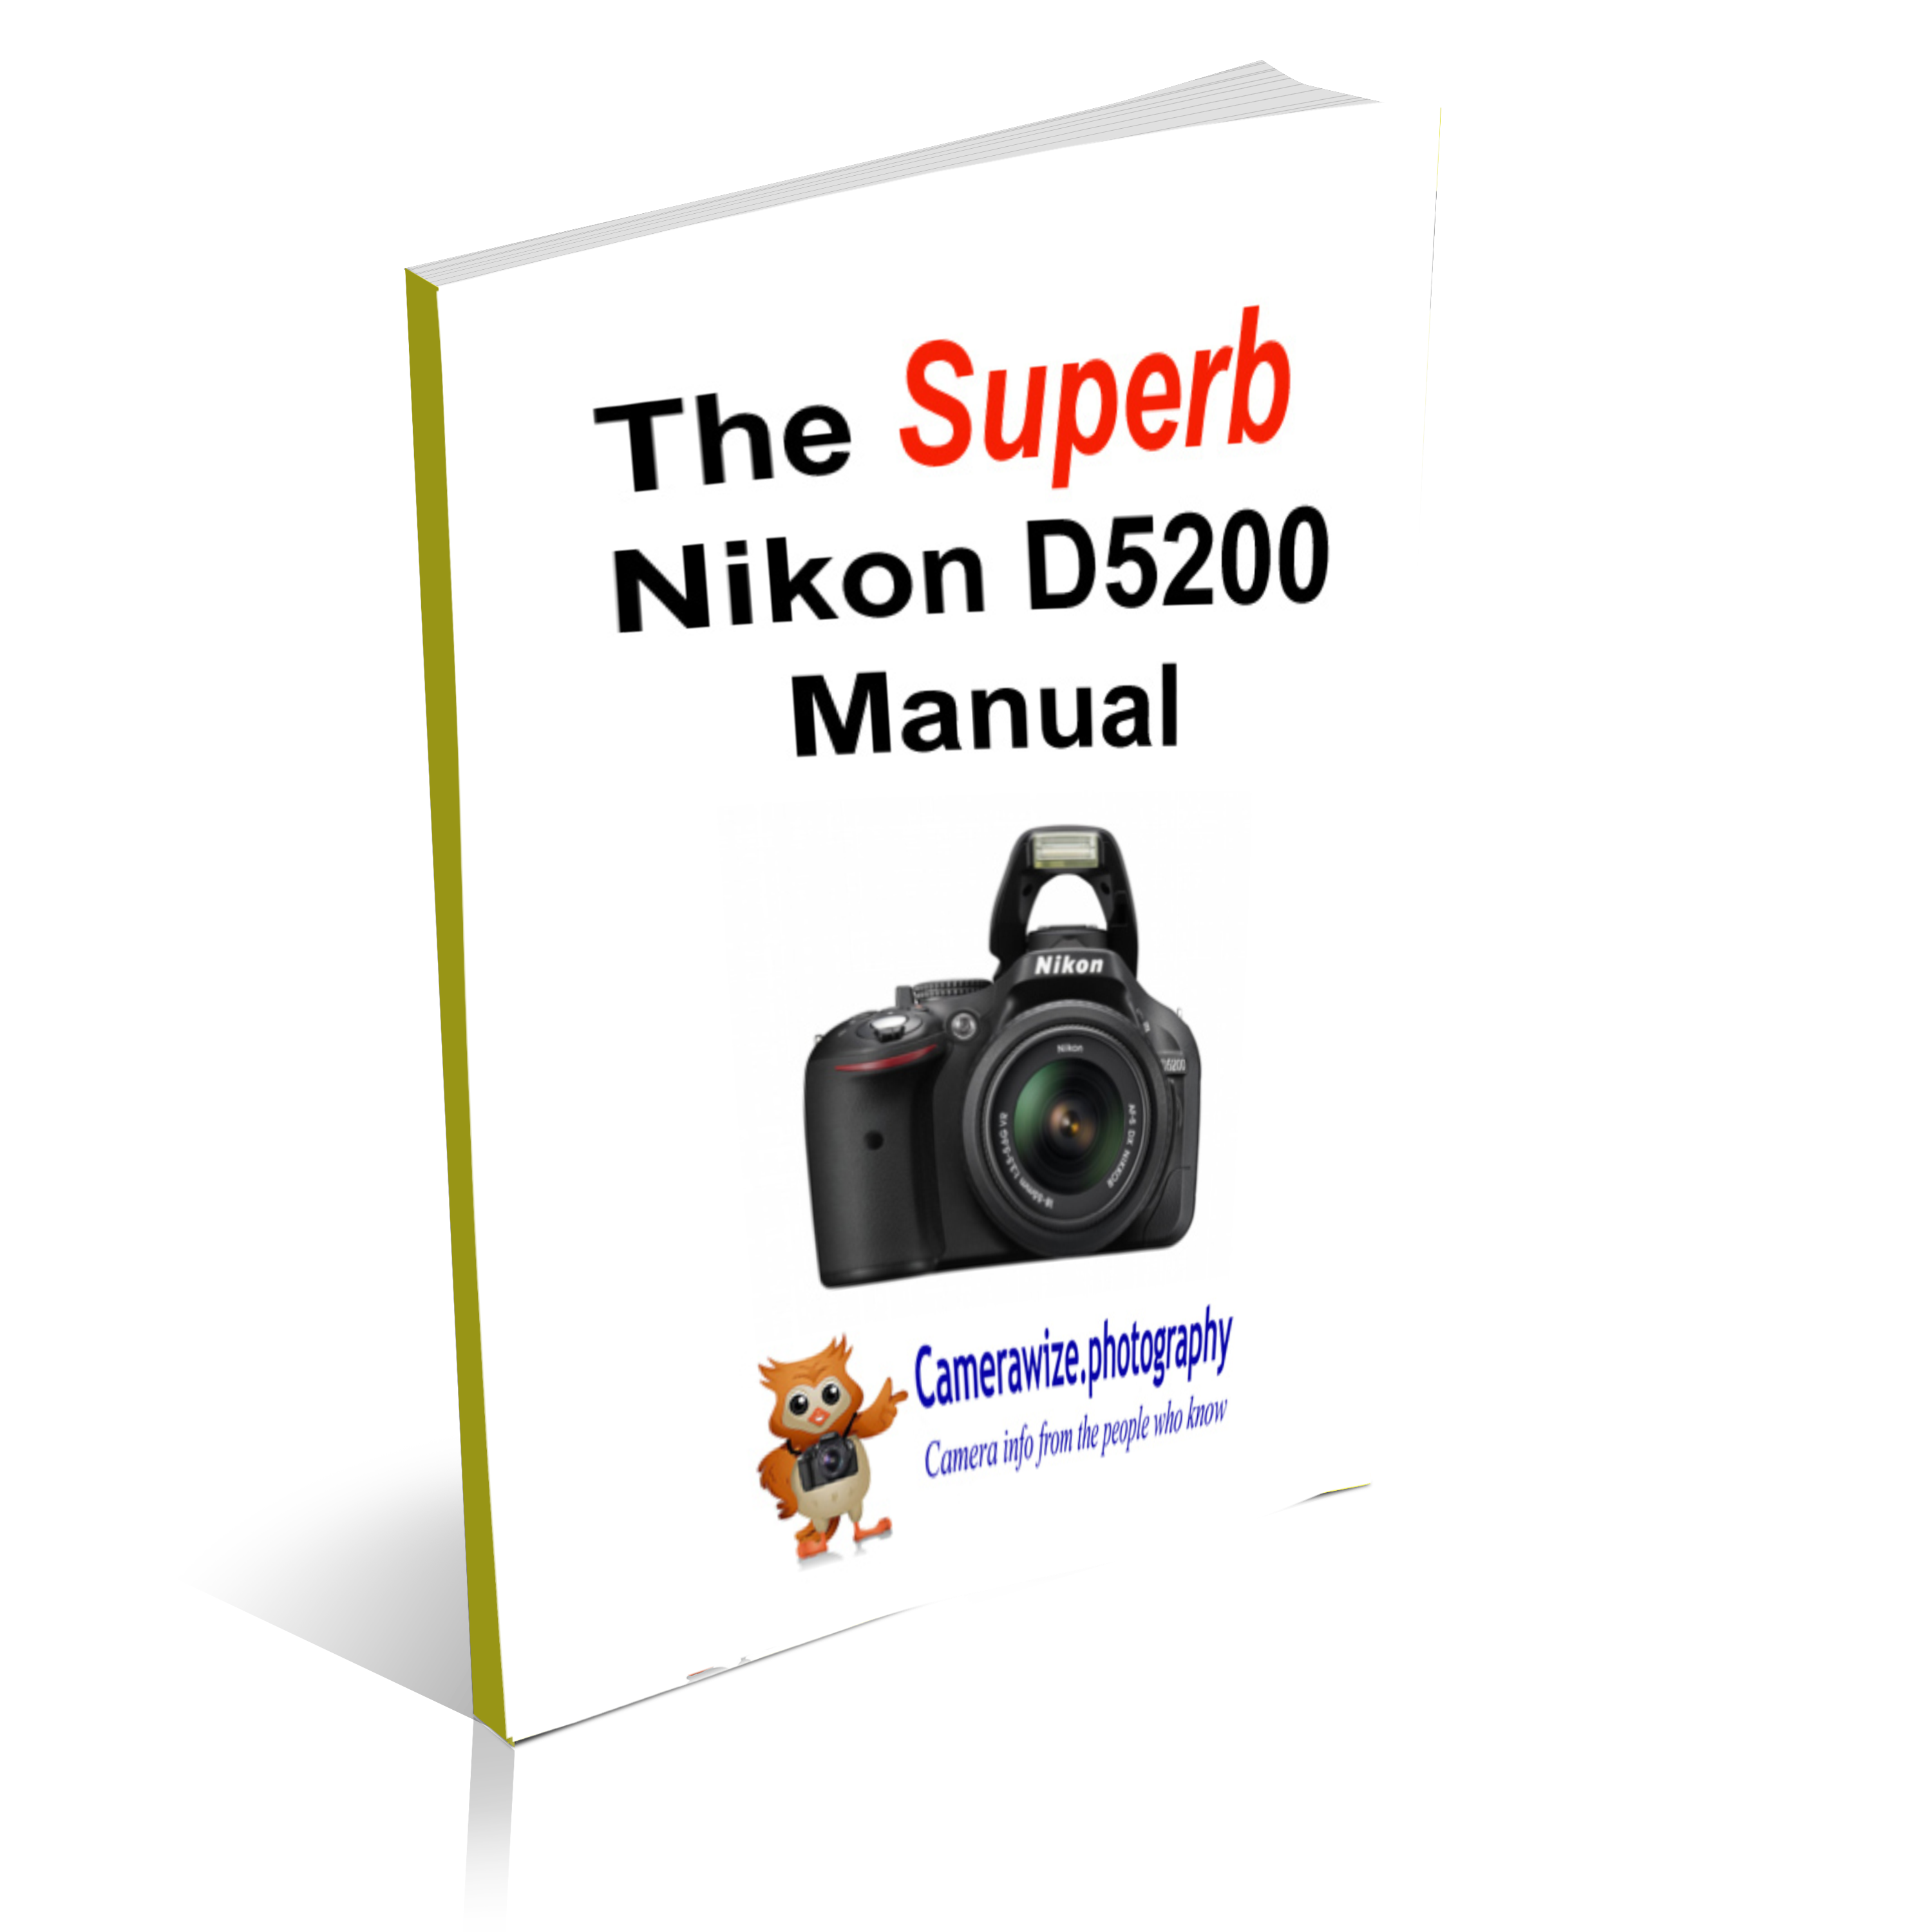 Get this Fantastic manual and master your Nikon D5200 - Camerawize